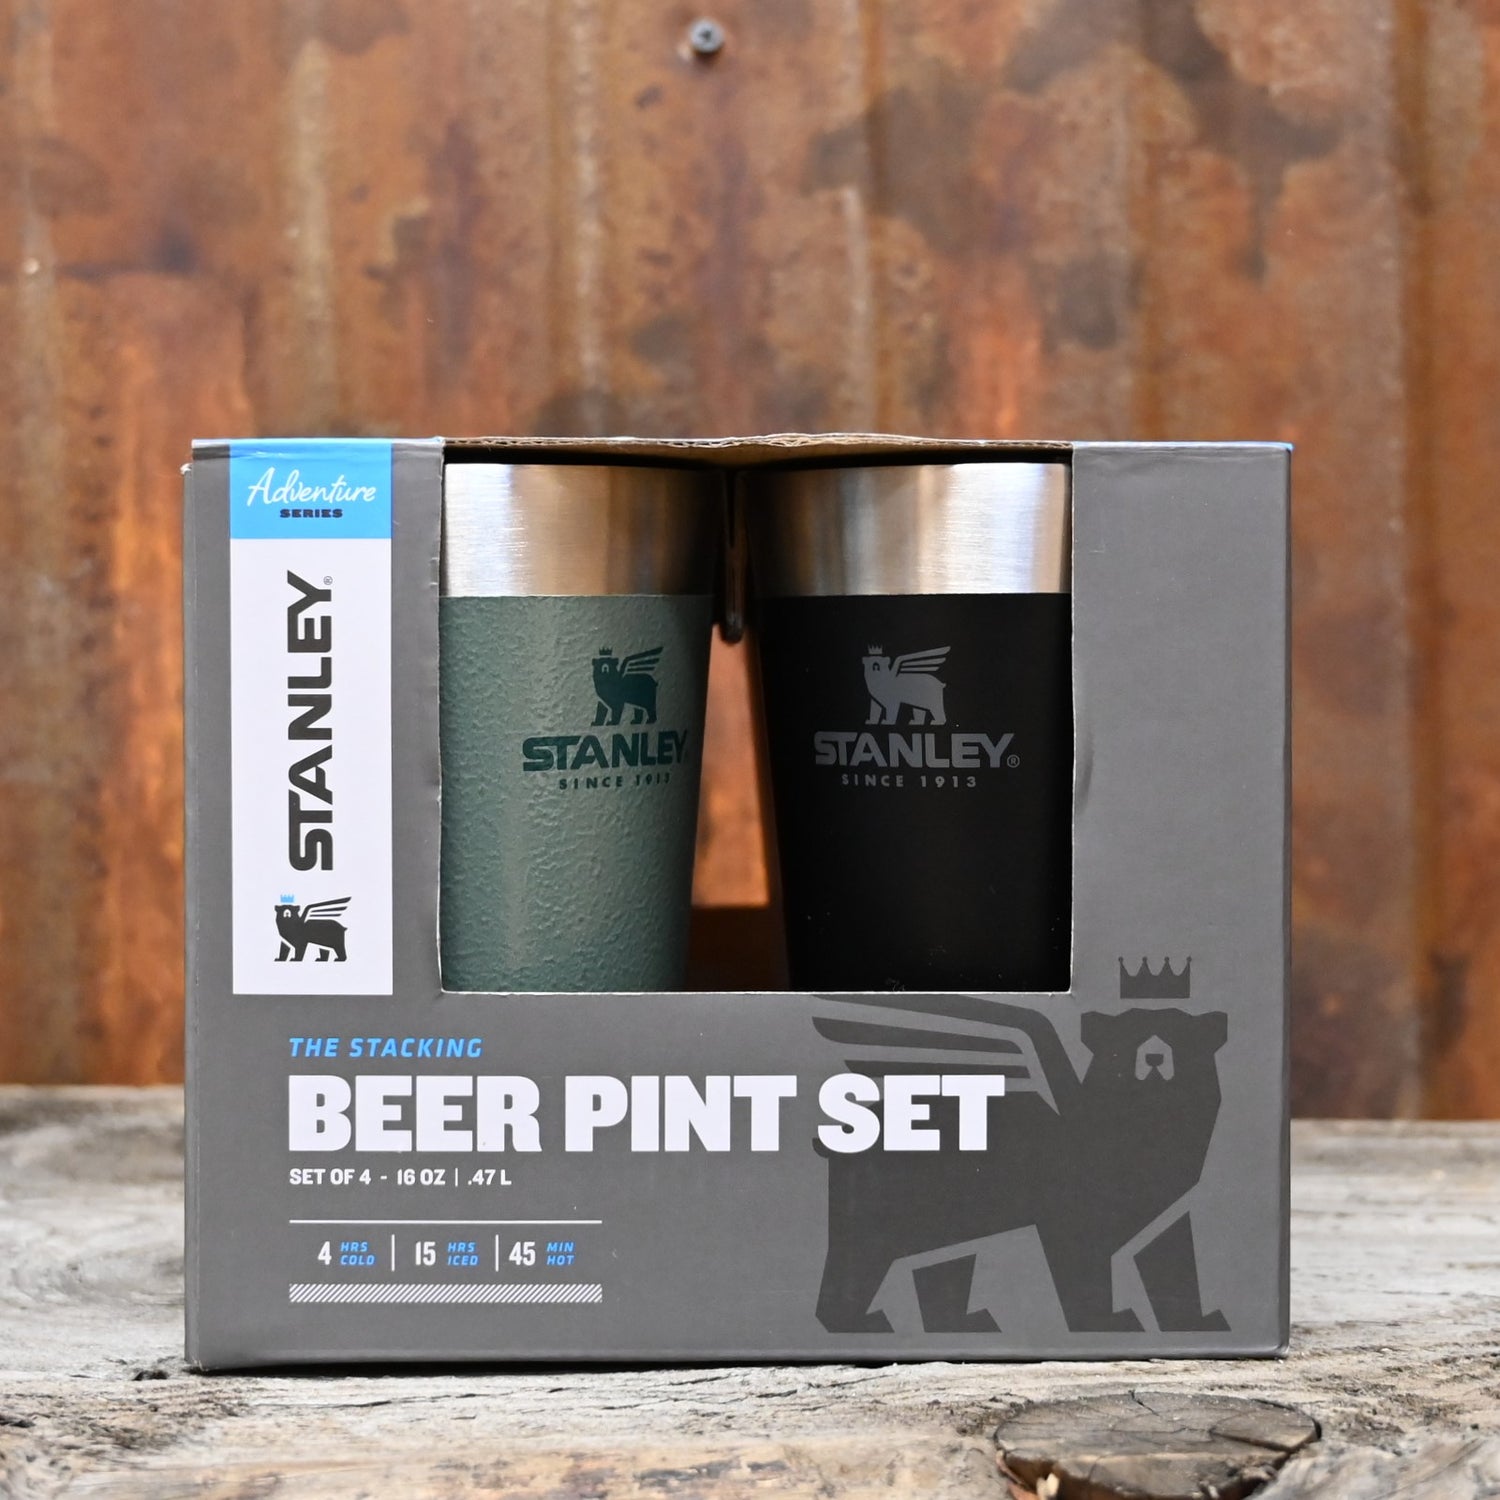 Stanley Stacking Beer Pint Set- 4 pack multi-pack view of pints